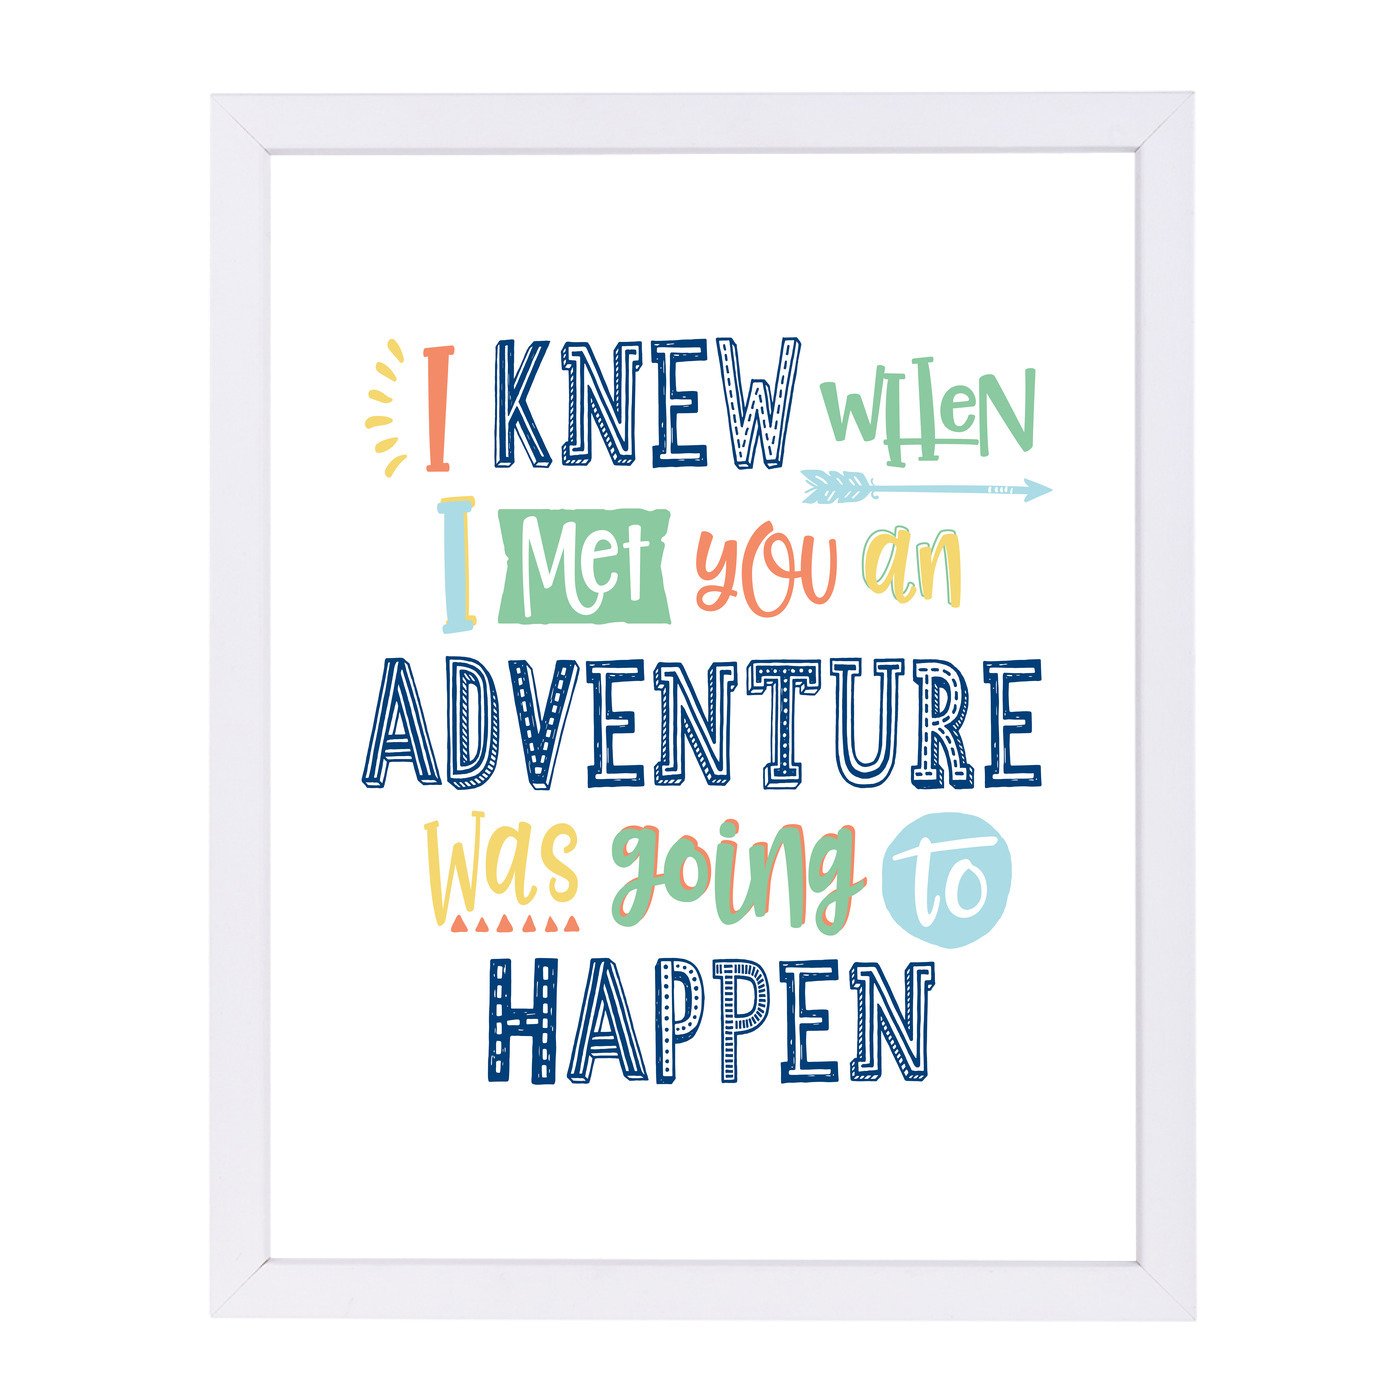 I Knew When I Met You An Adventure Was Going To Happen By Elena David - Framed Print - Americanflat